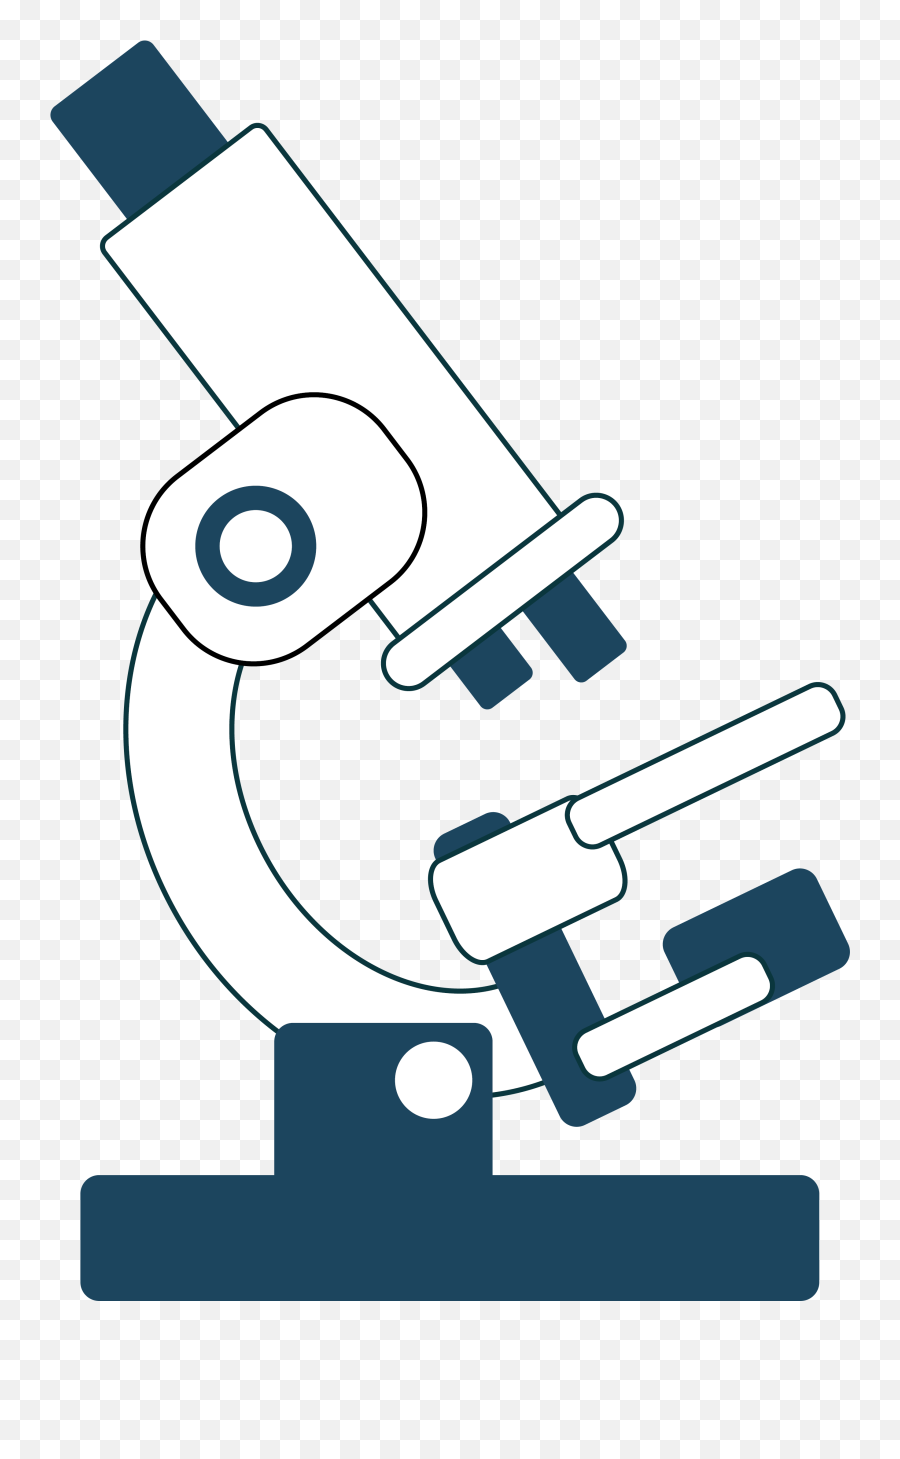 Diseases Such As Cancer Heart Disease - Transparent Background Microscope Clip Art Png,Microscope Transparent Background